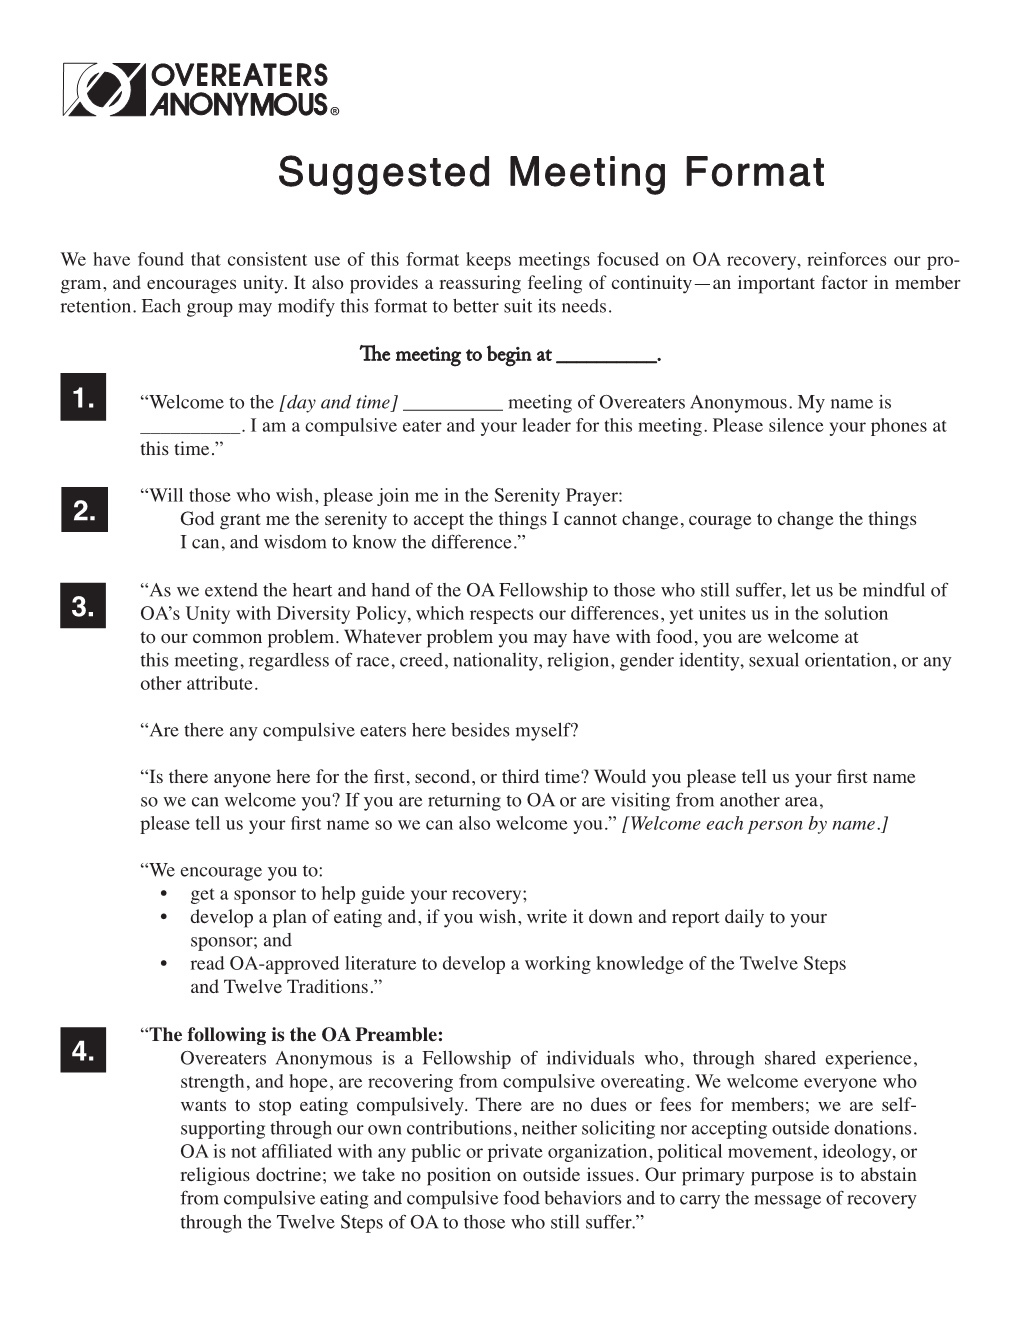 OA Suggested Meeting Format